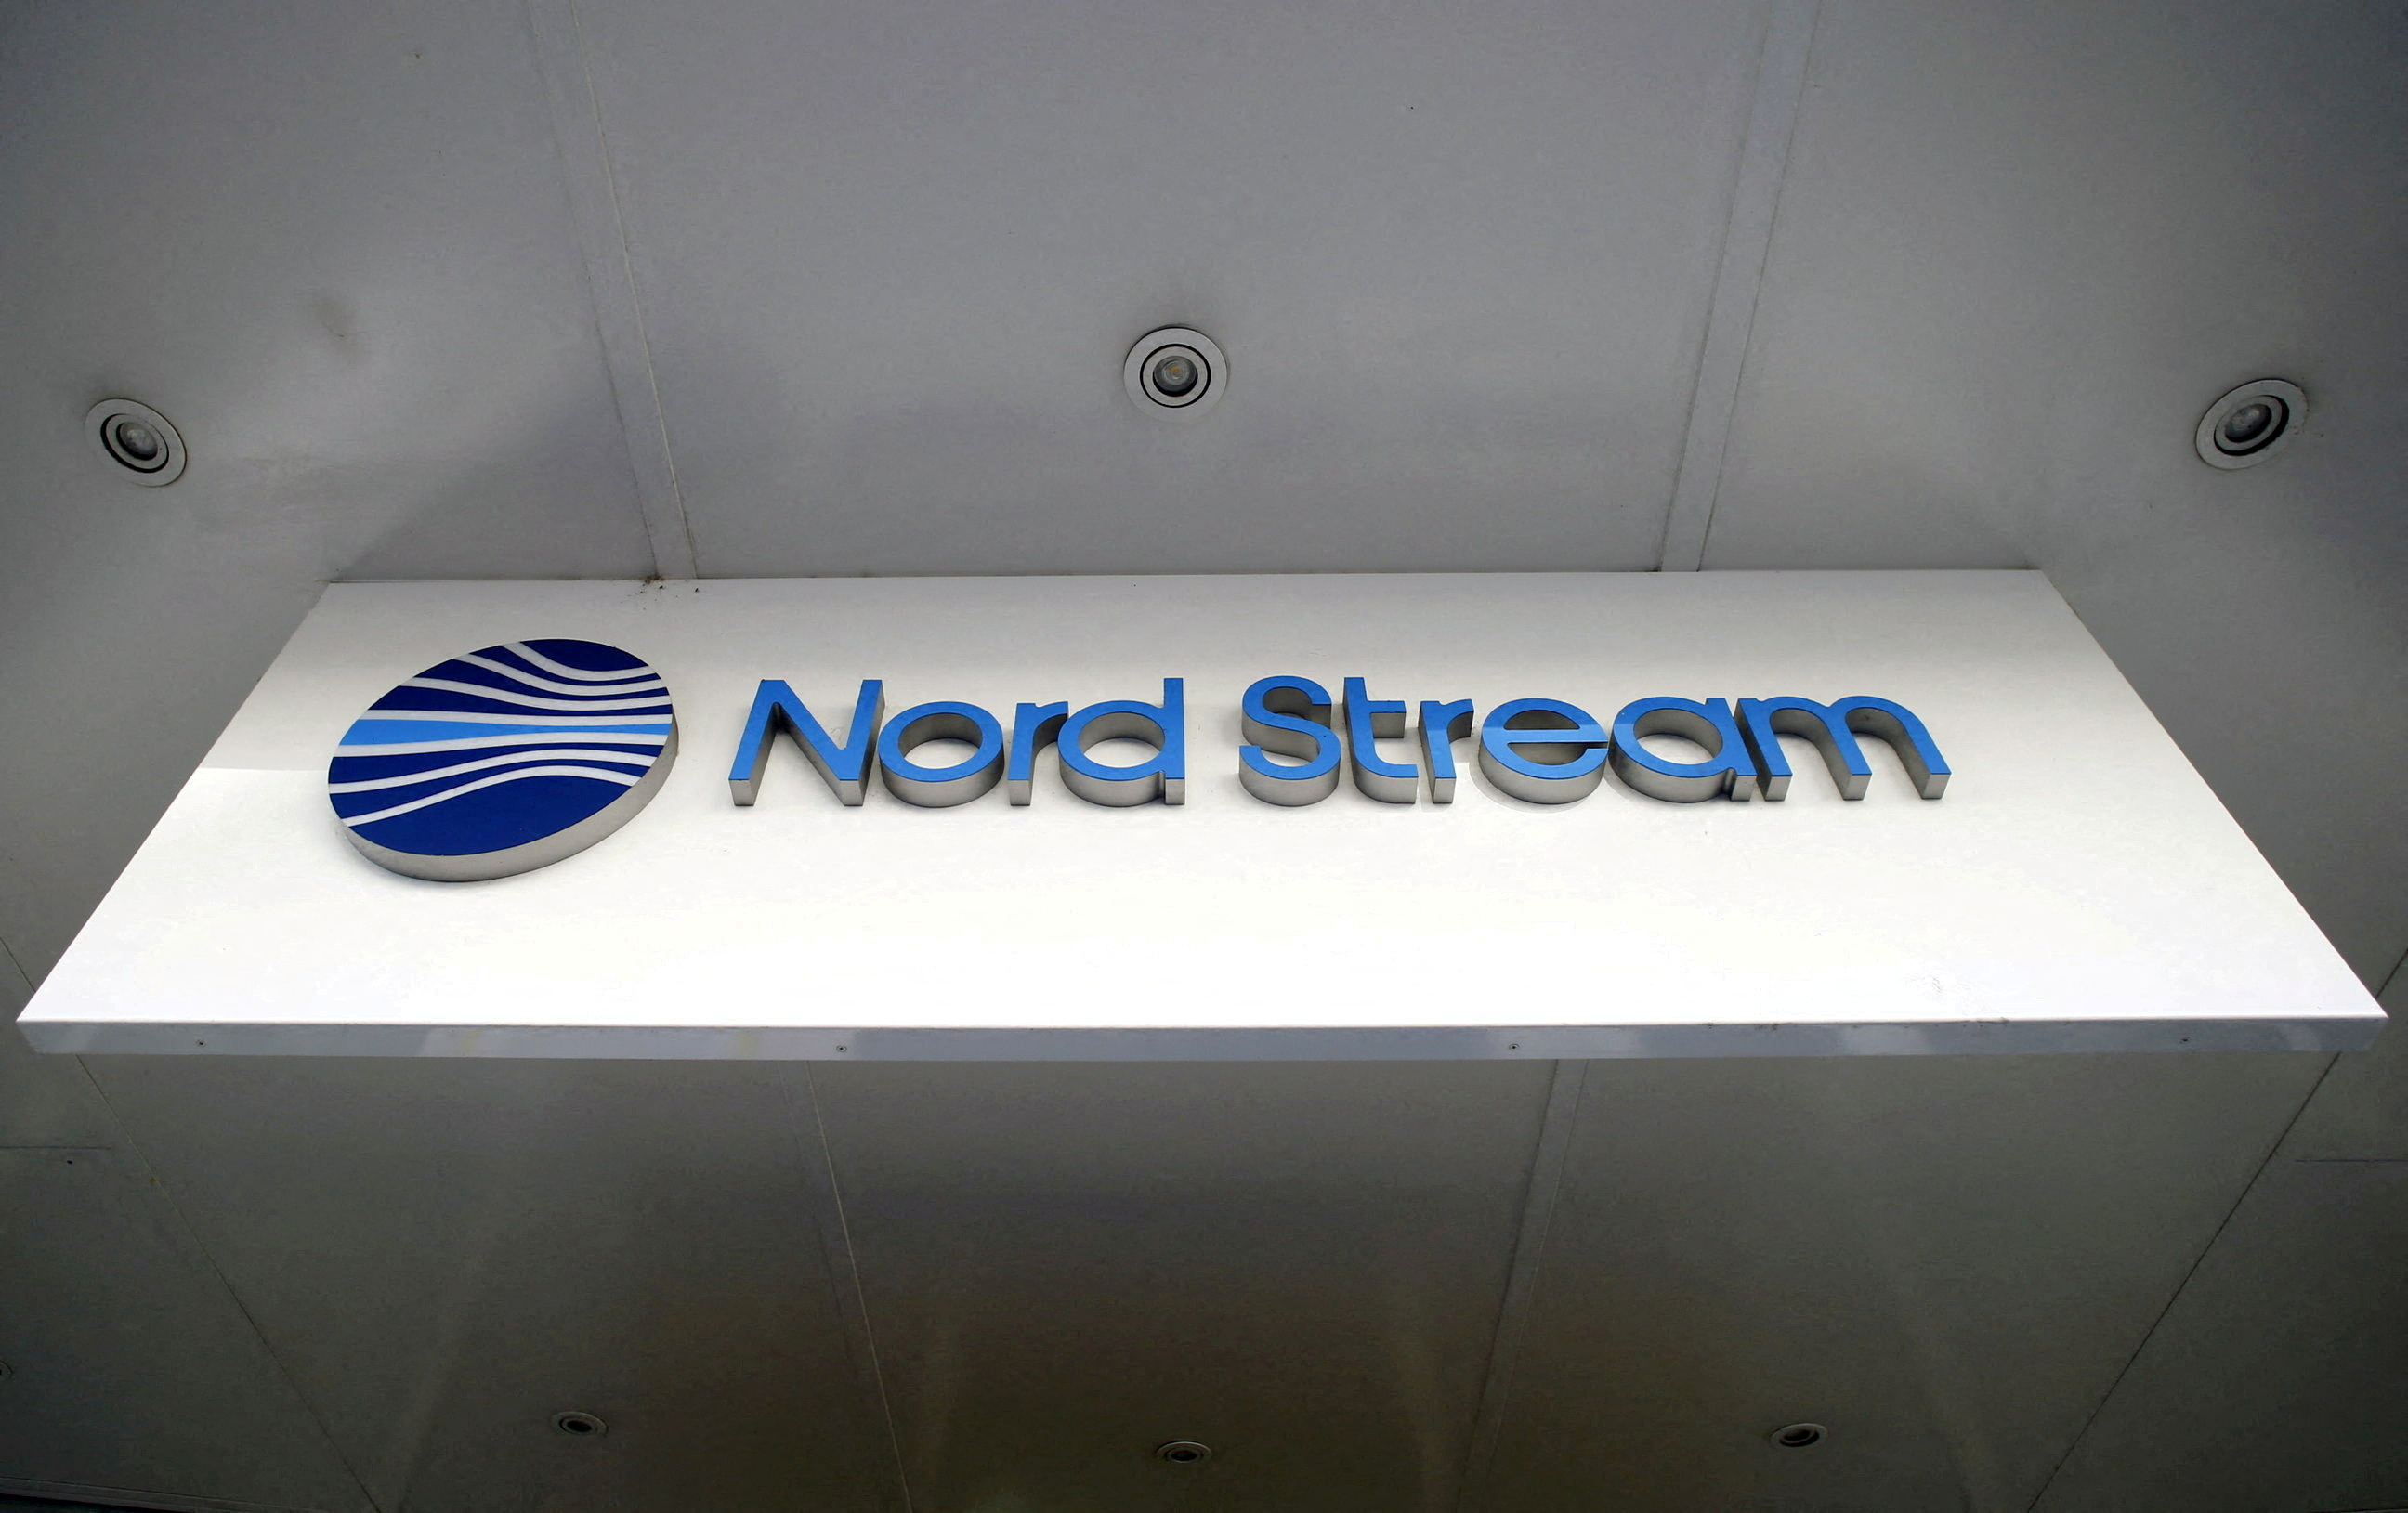  Nord Stream at the headquarters of Nord Stream AG in Zug